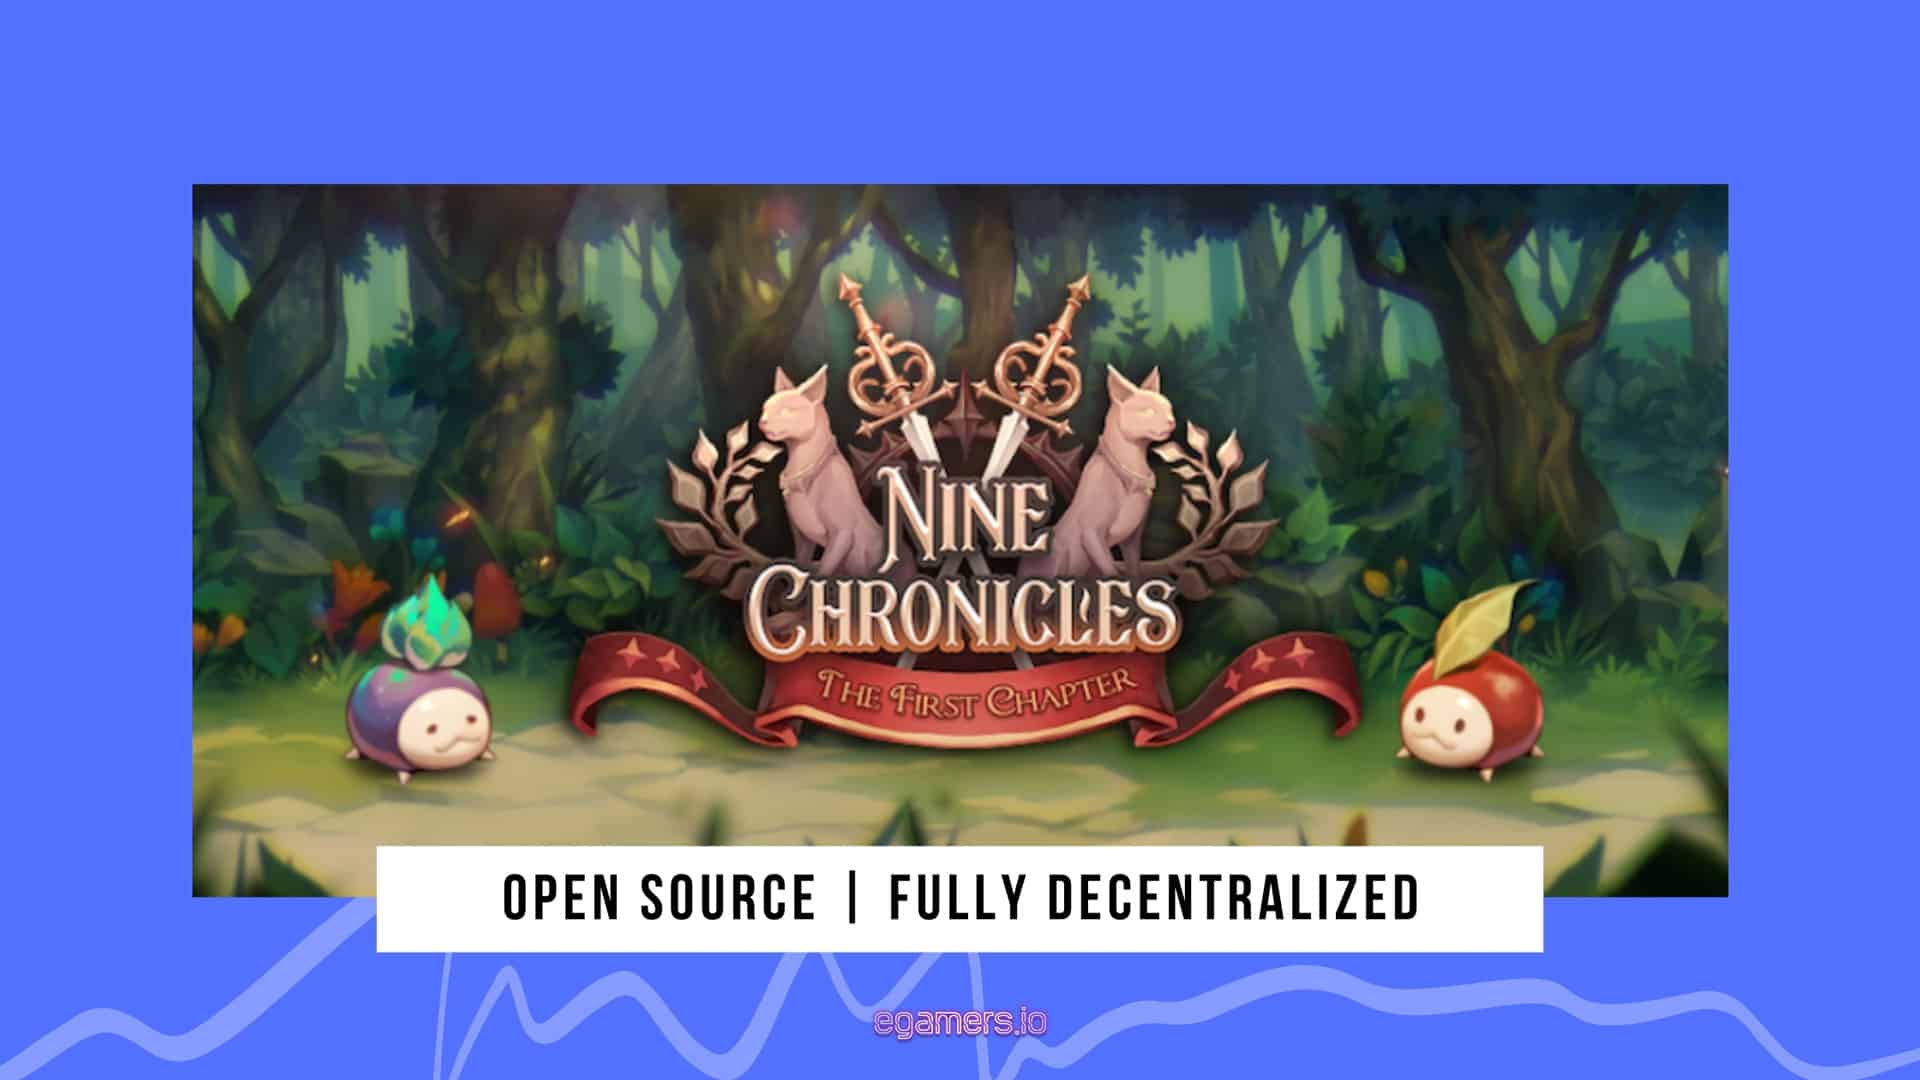 Nine Chronicles overview